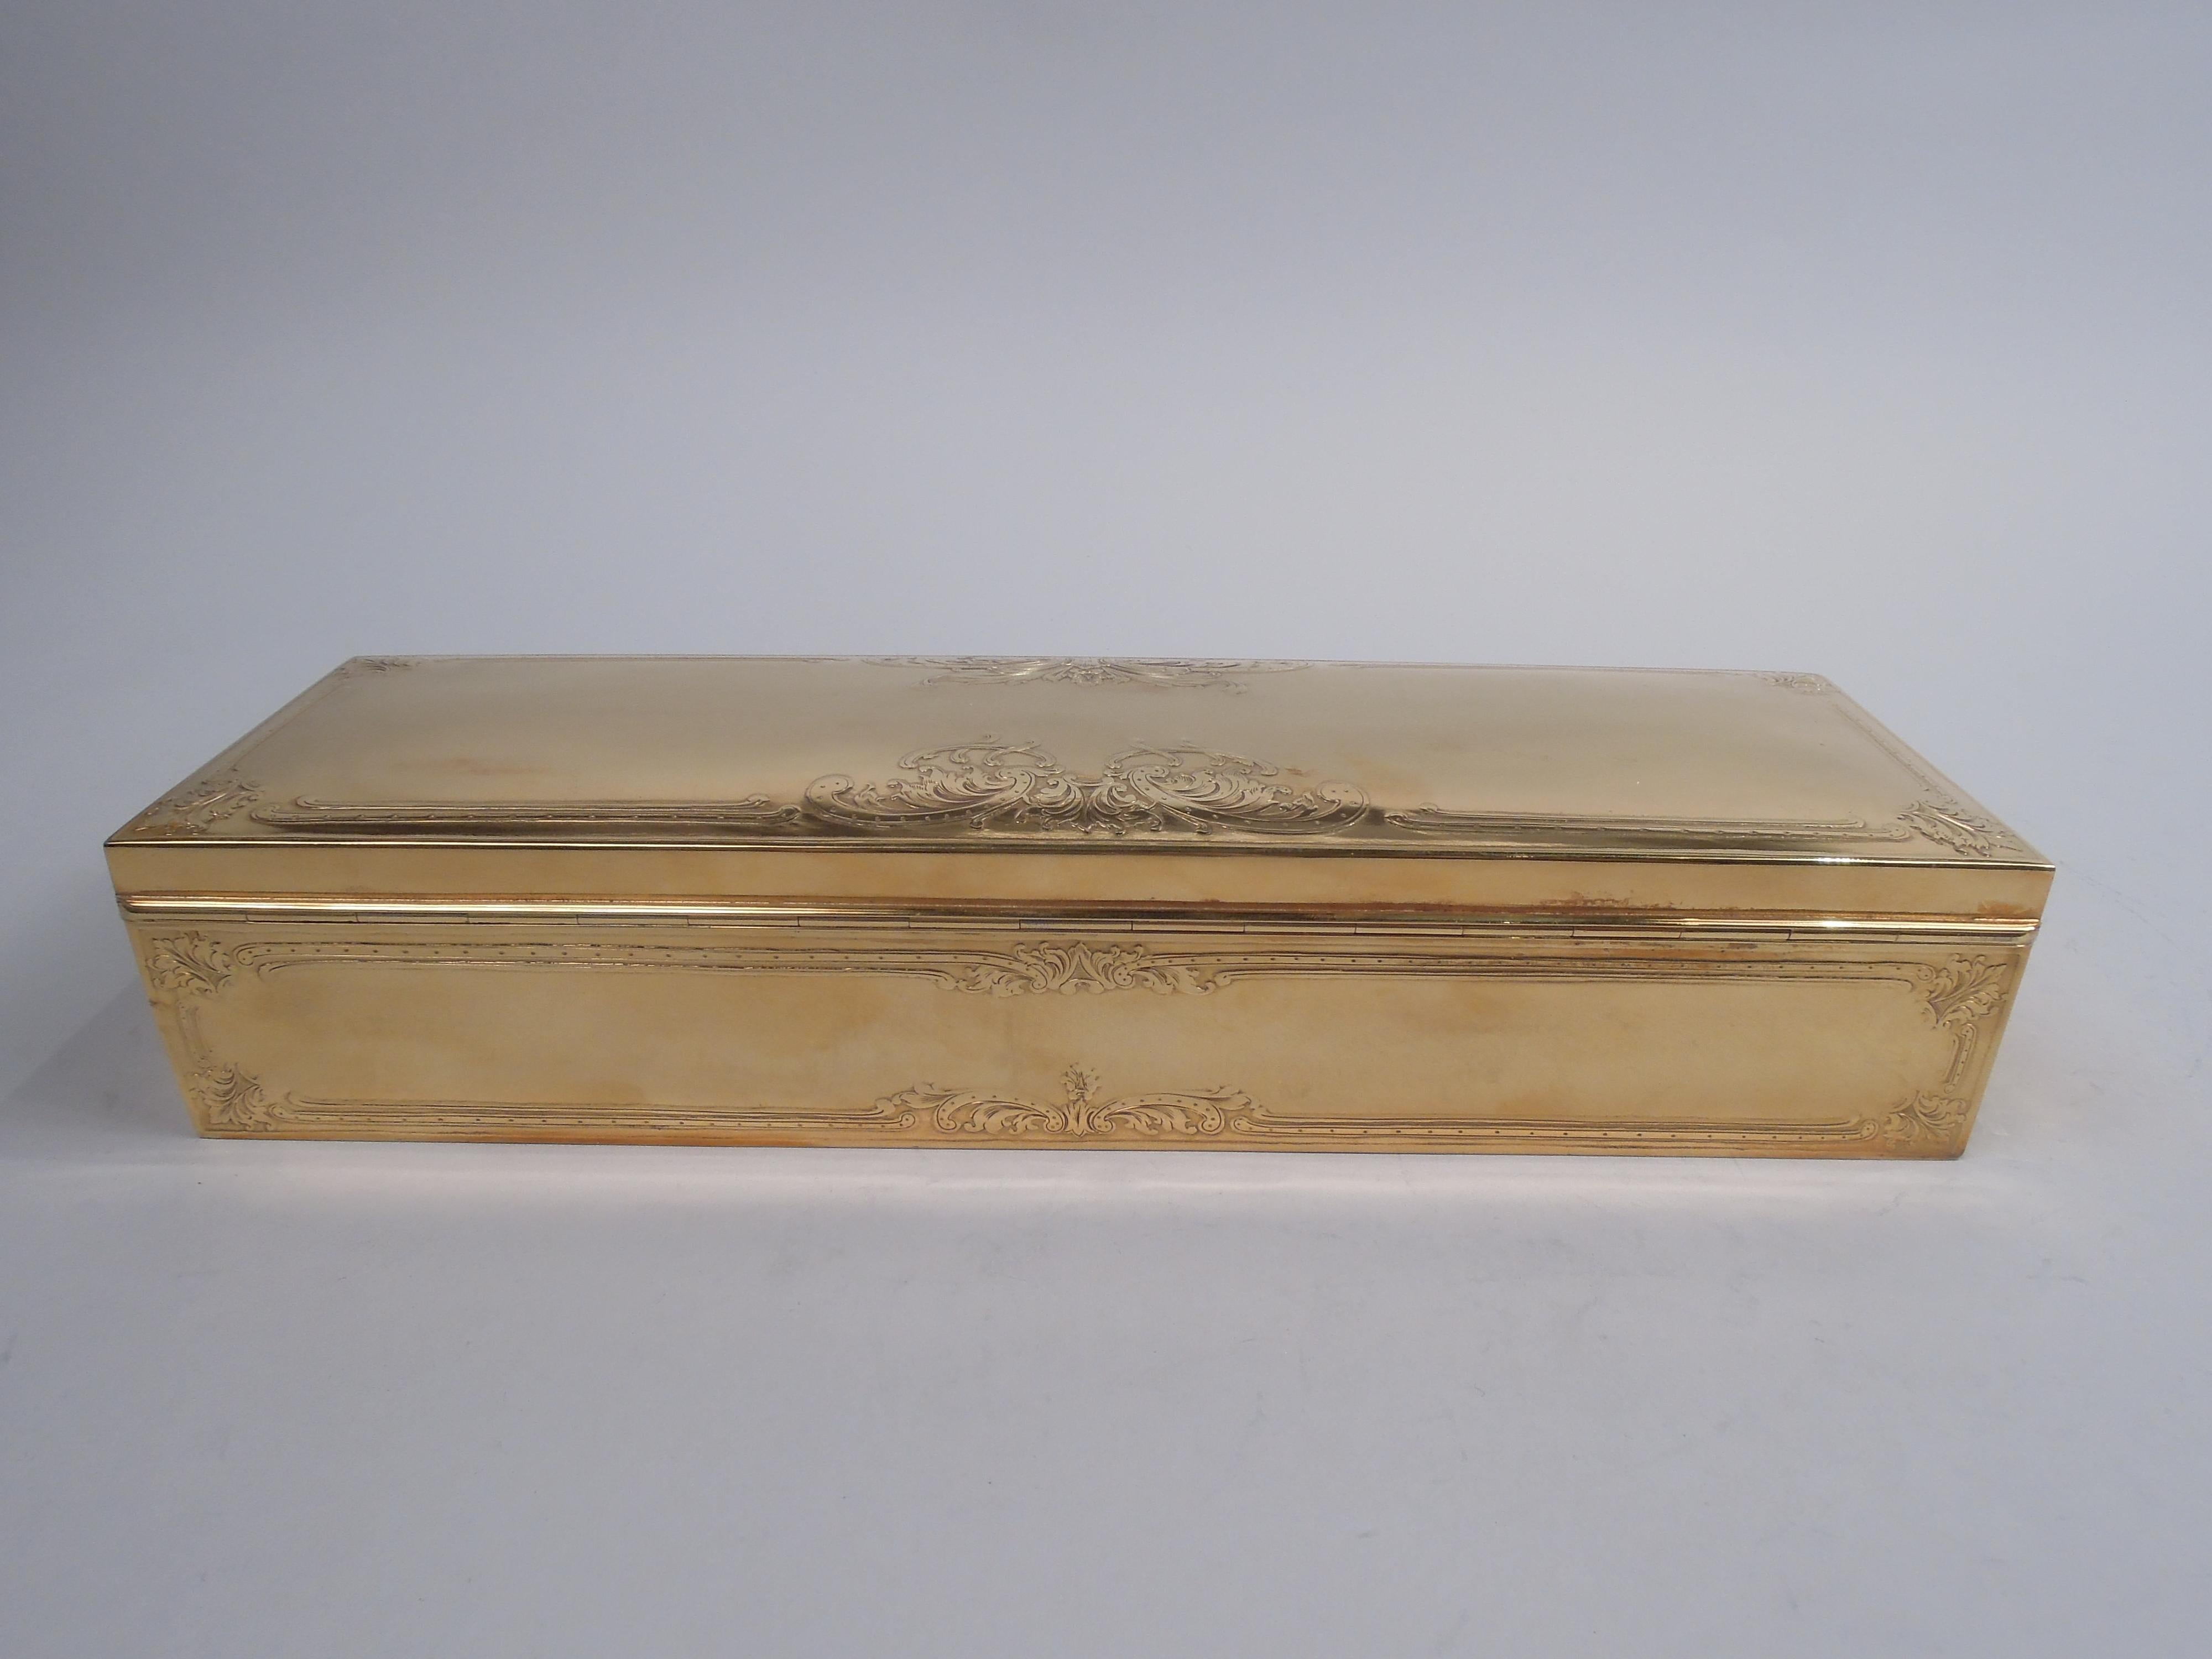 Antique American Edwardian Classical Sterling Silver Glove Box 1